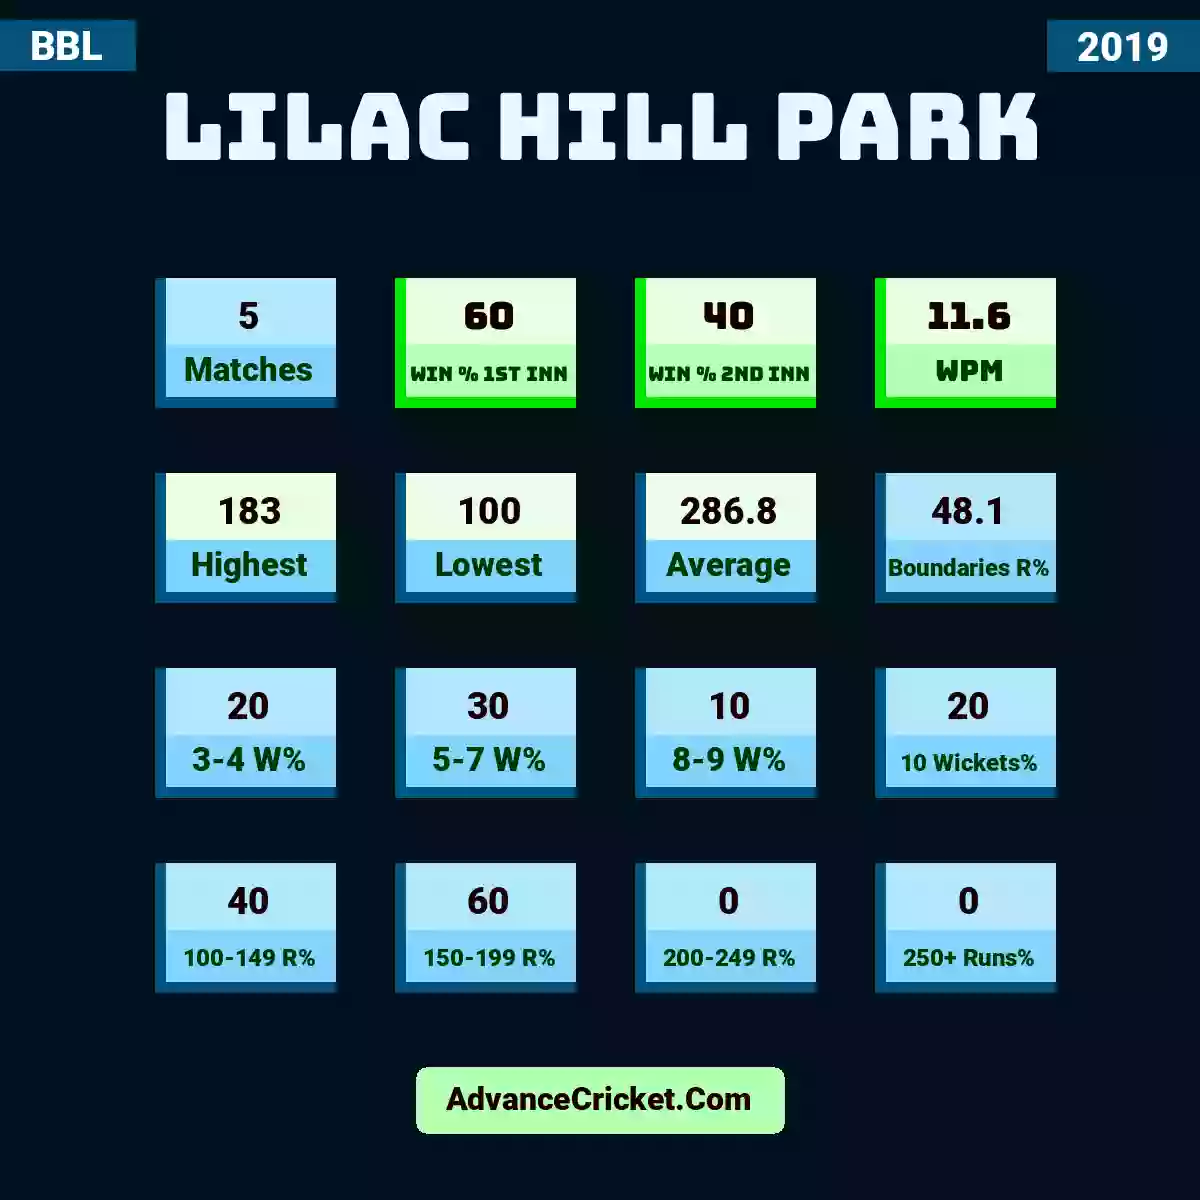 Image showing Lilac Hill Park with Matches: 5, Win % 1st Inn: 60, Win % 2nd Inn: 40, WPM: 11.6, Highest: 183, Lowest: 100, Average: 286.8, Boundaries R%: 48.1, 3-4 W%: 20, 5-7 W%: 30, 8-9 W%: 10, 10 Wickets%: 20, 100-149 R%: 40, 150-199 R%: 60, 200-249 R%: 0, 250+ Runs%: 0.